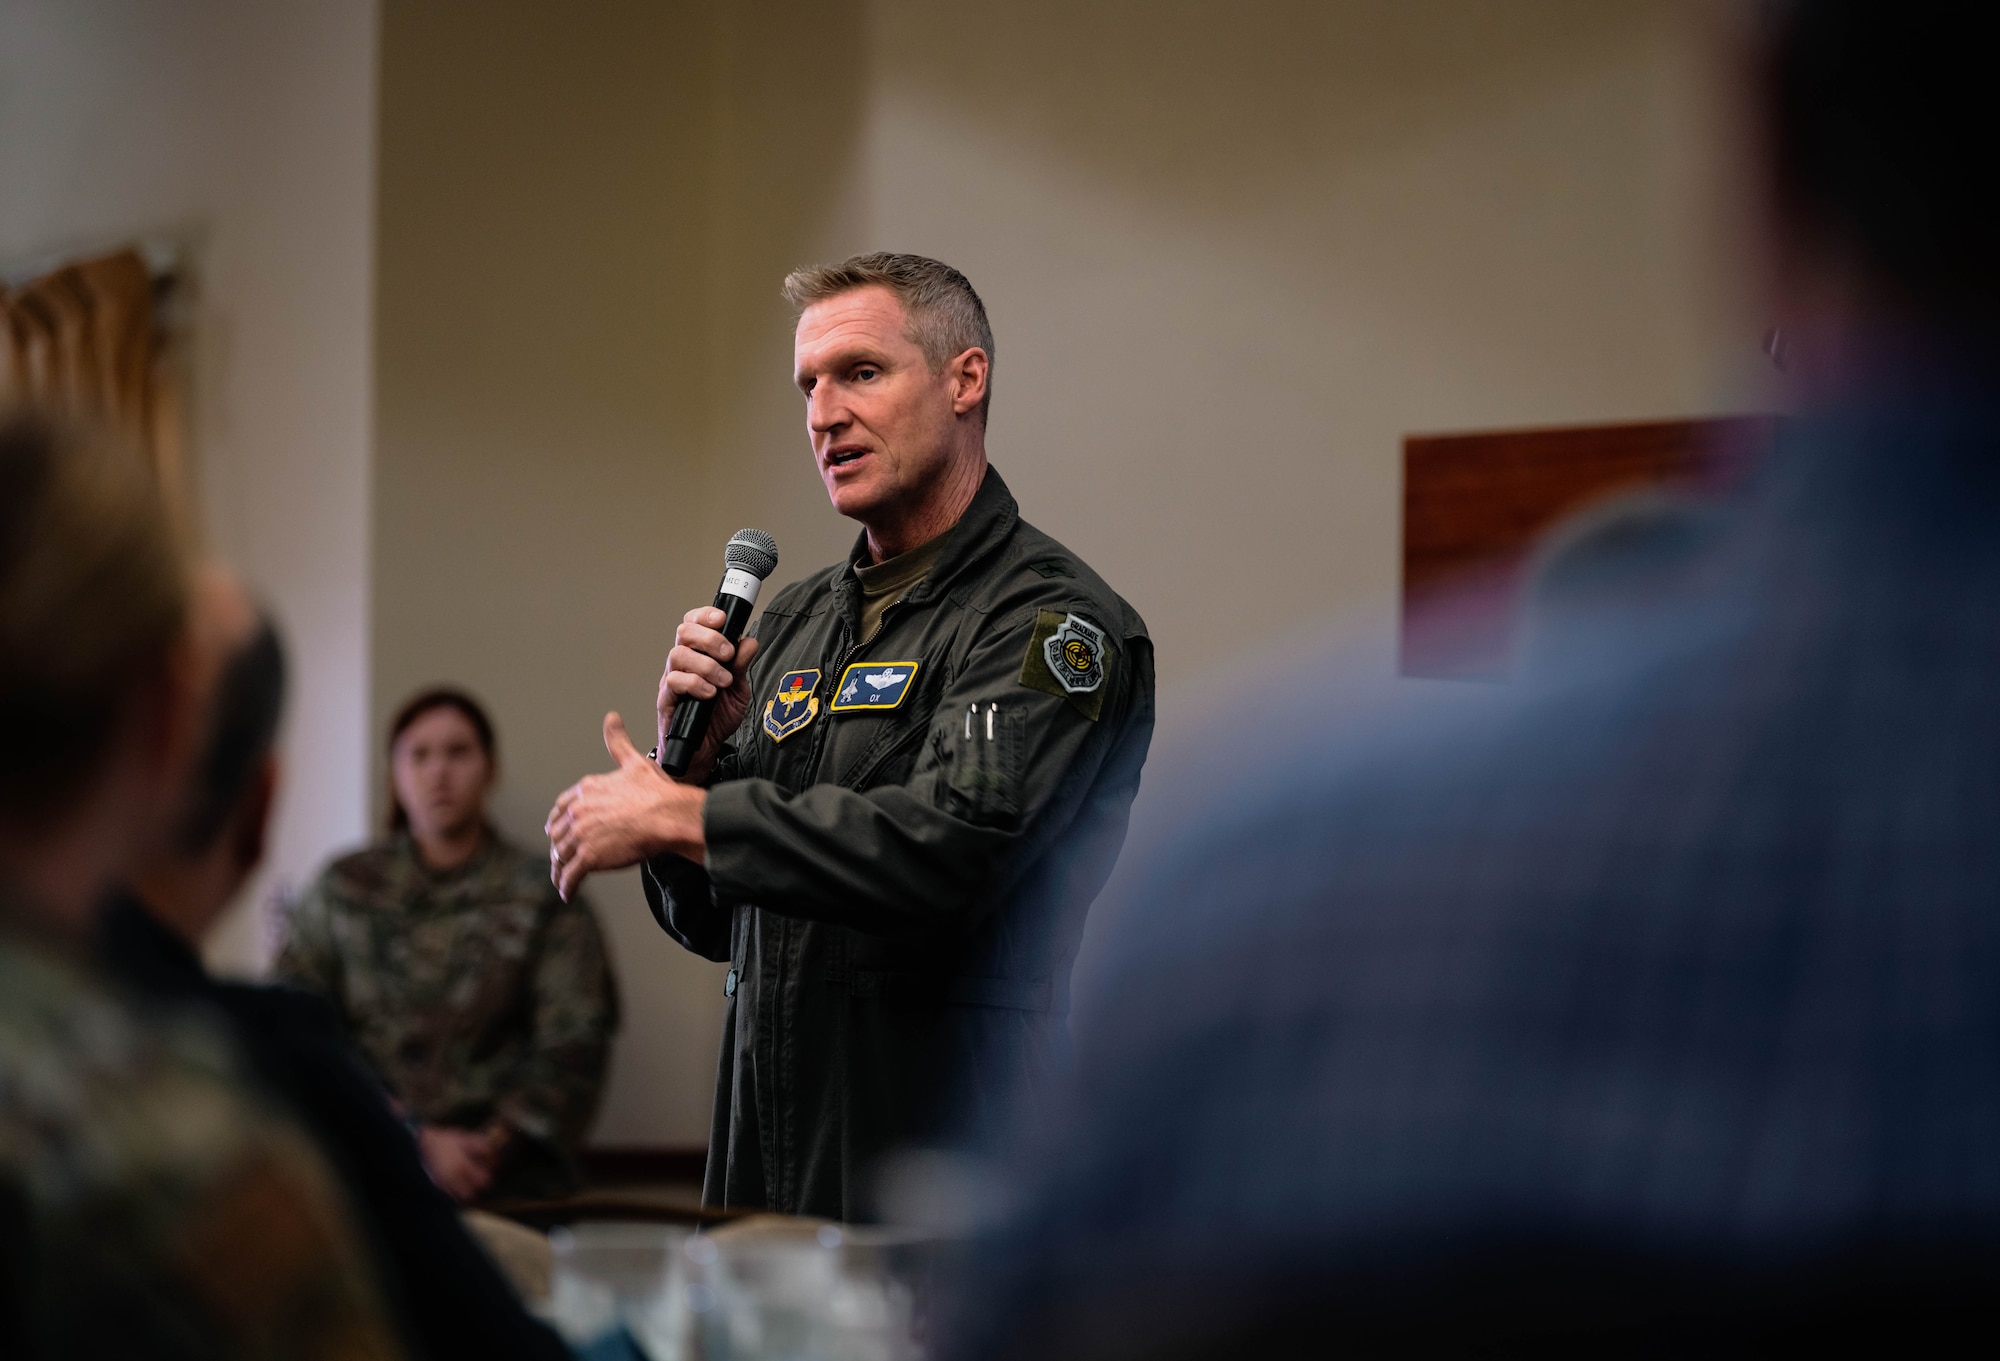 U.S. Air Force Brig. Gen. Jason Rueschhoff, 56th Fighter Wing commander gives opening remarks for the honorary commanders’ overnight experience